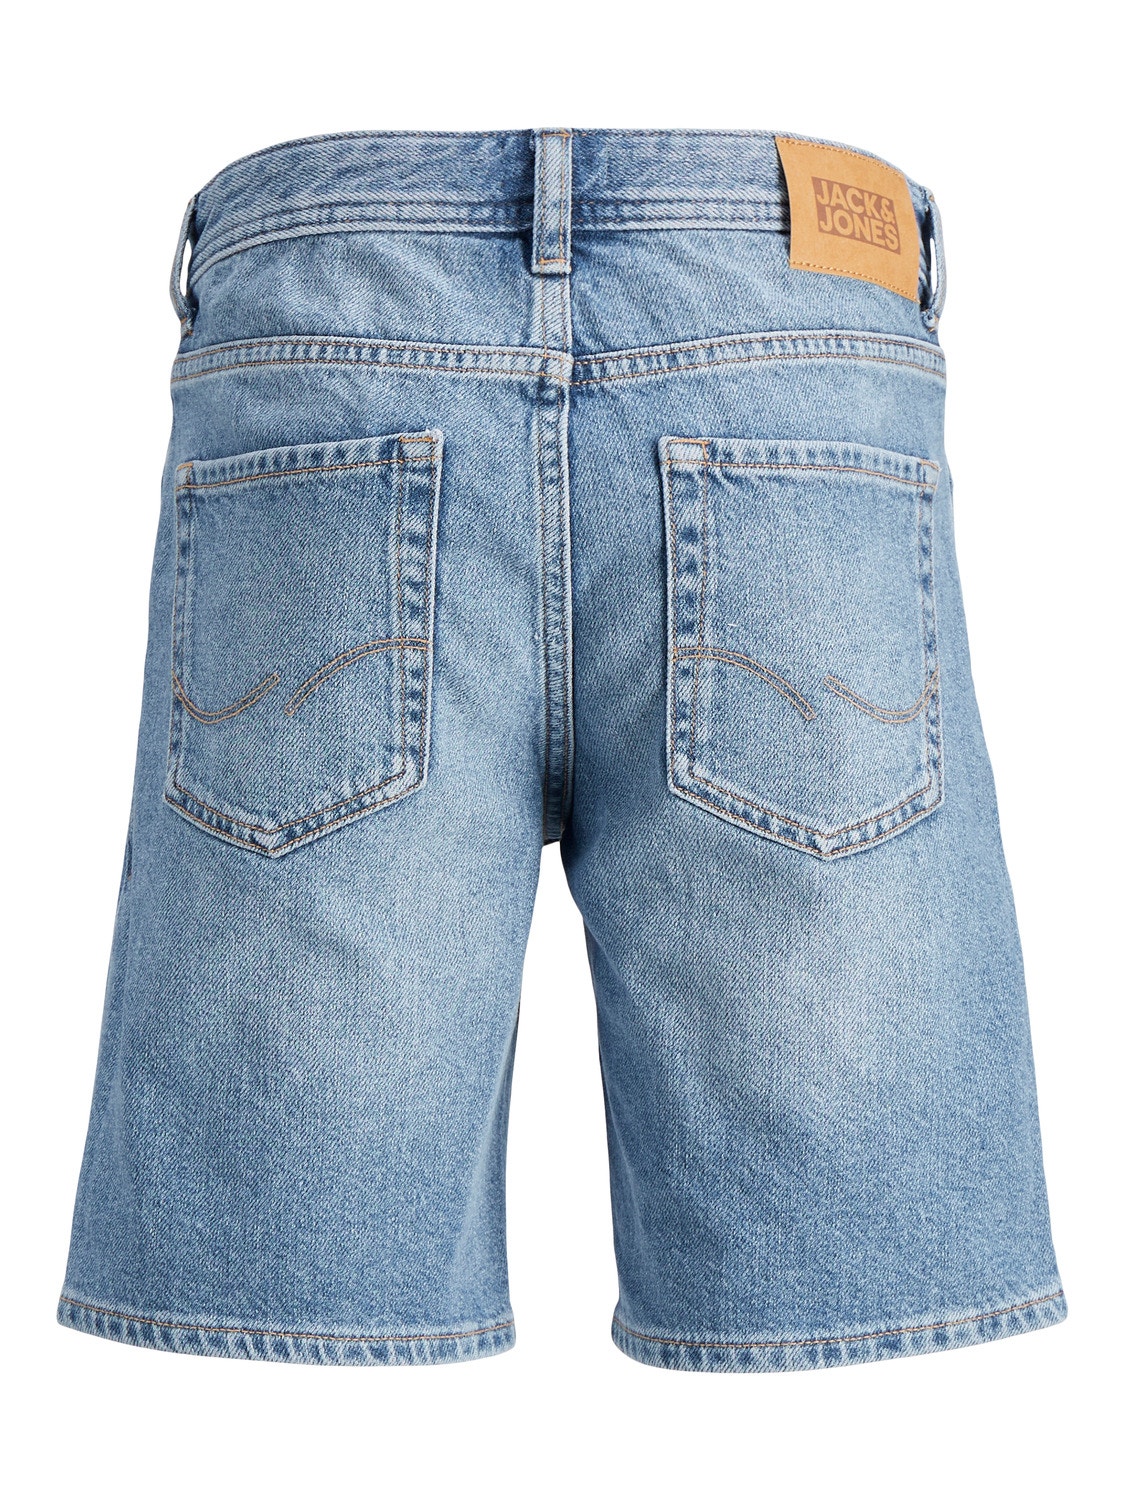 Jack & Jones Relaxed Fit Relaxed Fit Shorts Für jungs -Blue Denim - 12250057